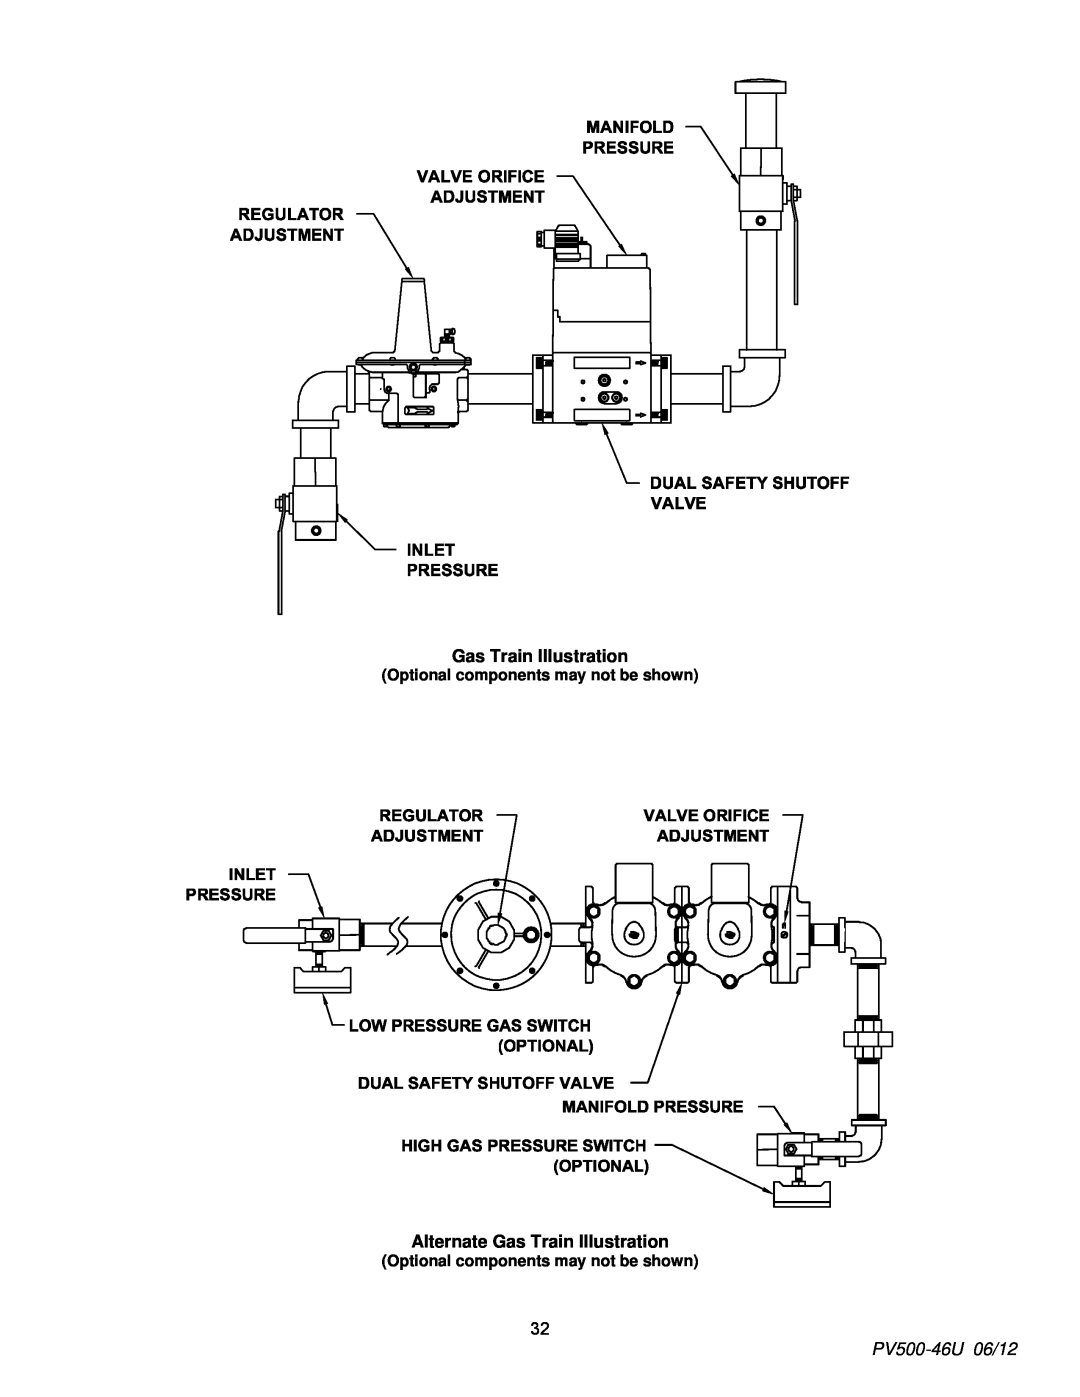 PVI Industries 180, 150 manual Alternate Gas Train Illustration, PV500-46U06/12, Optional components may not be shown 